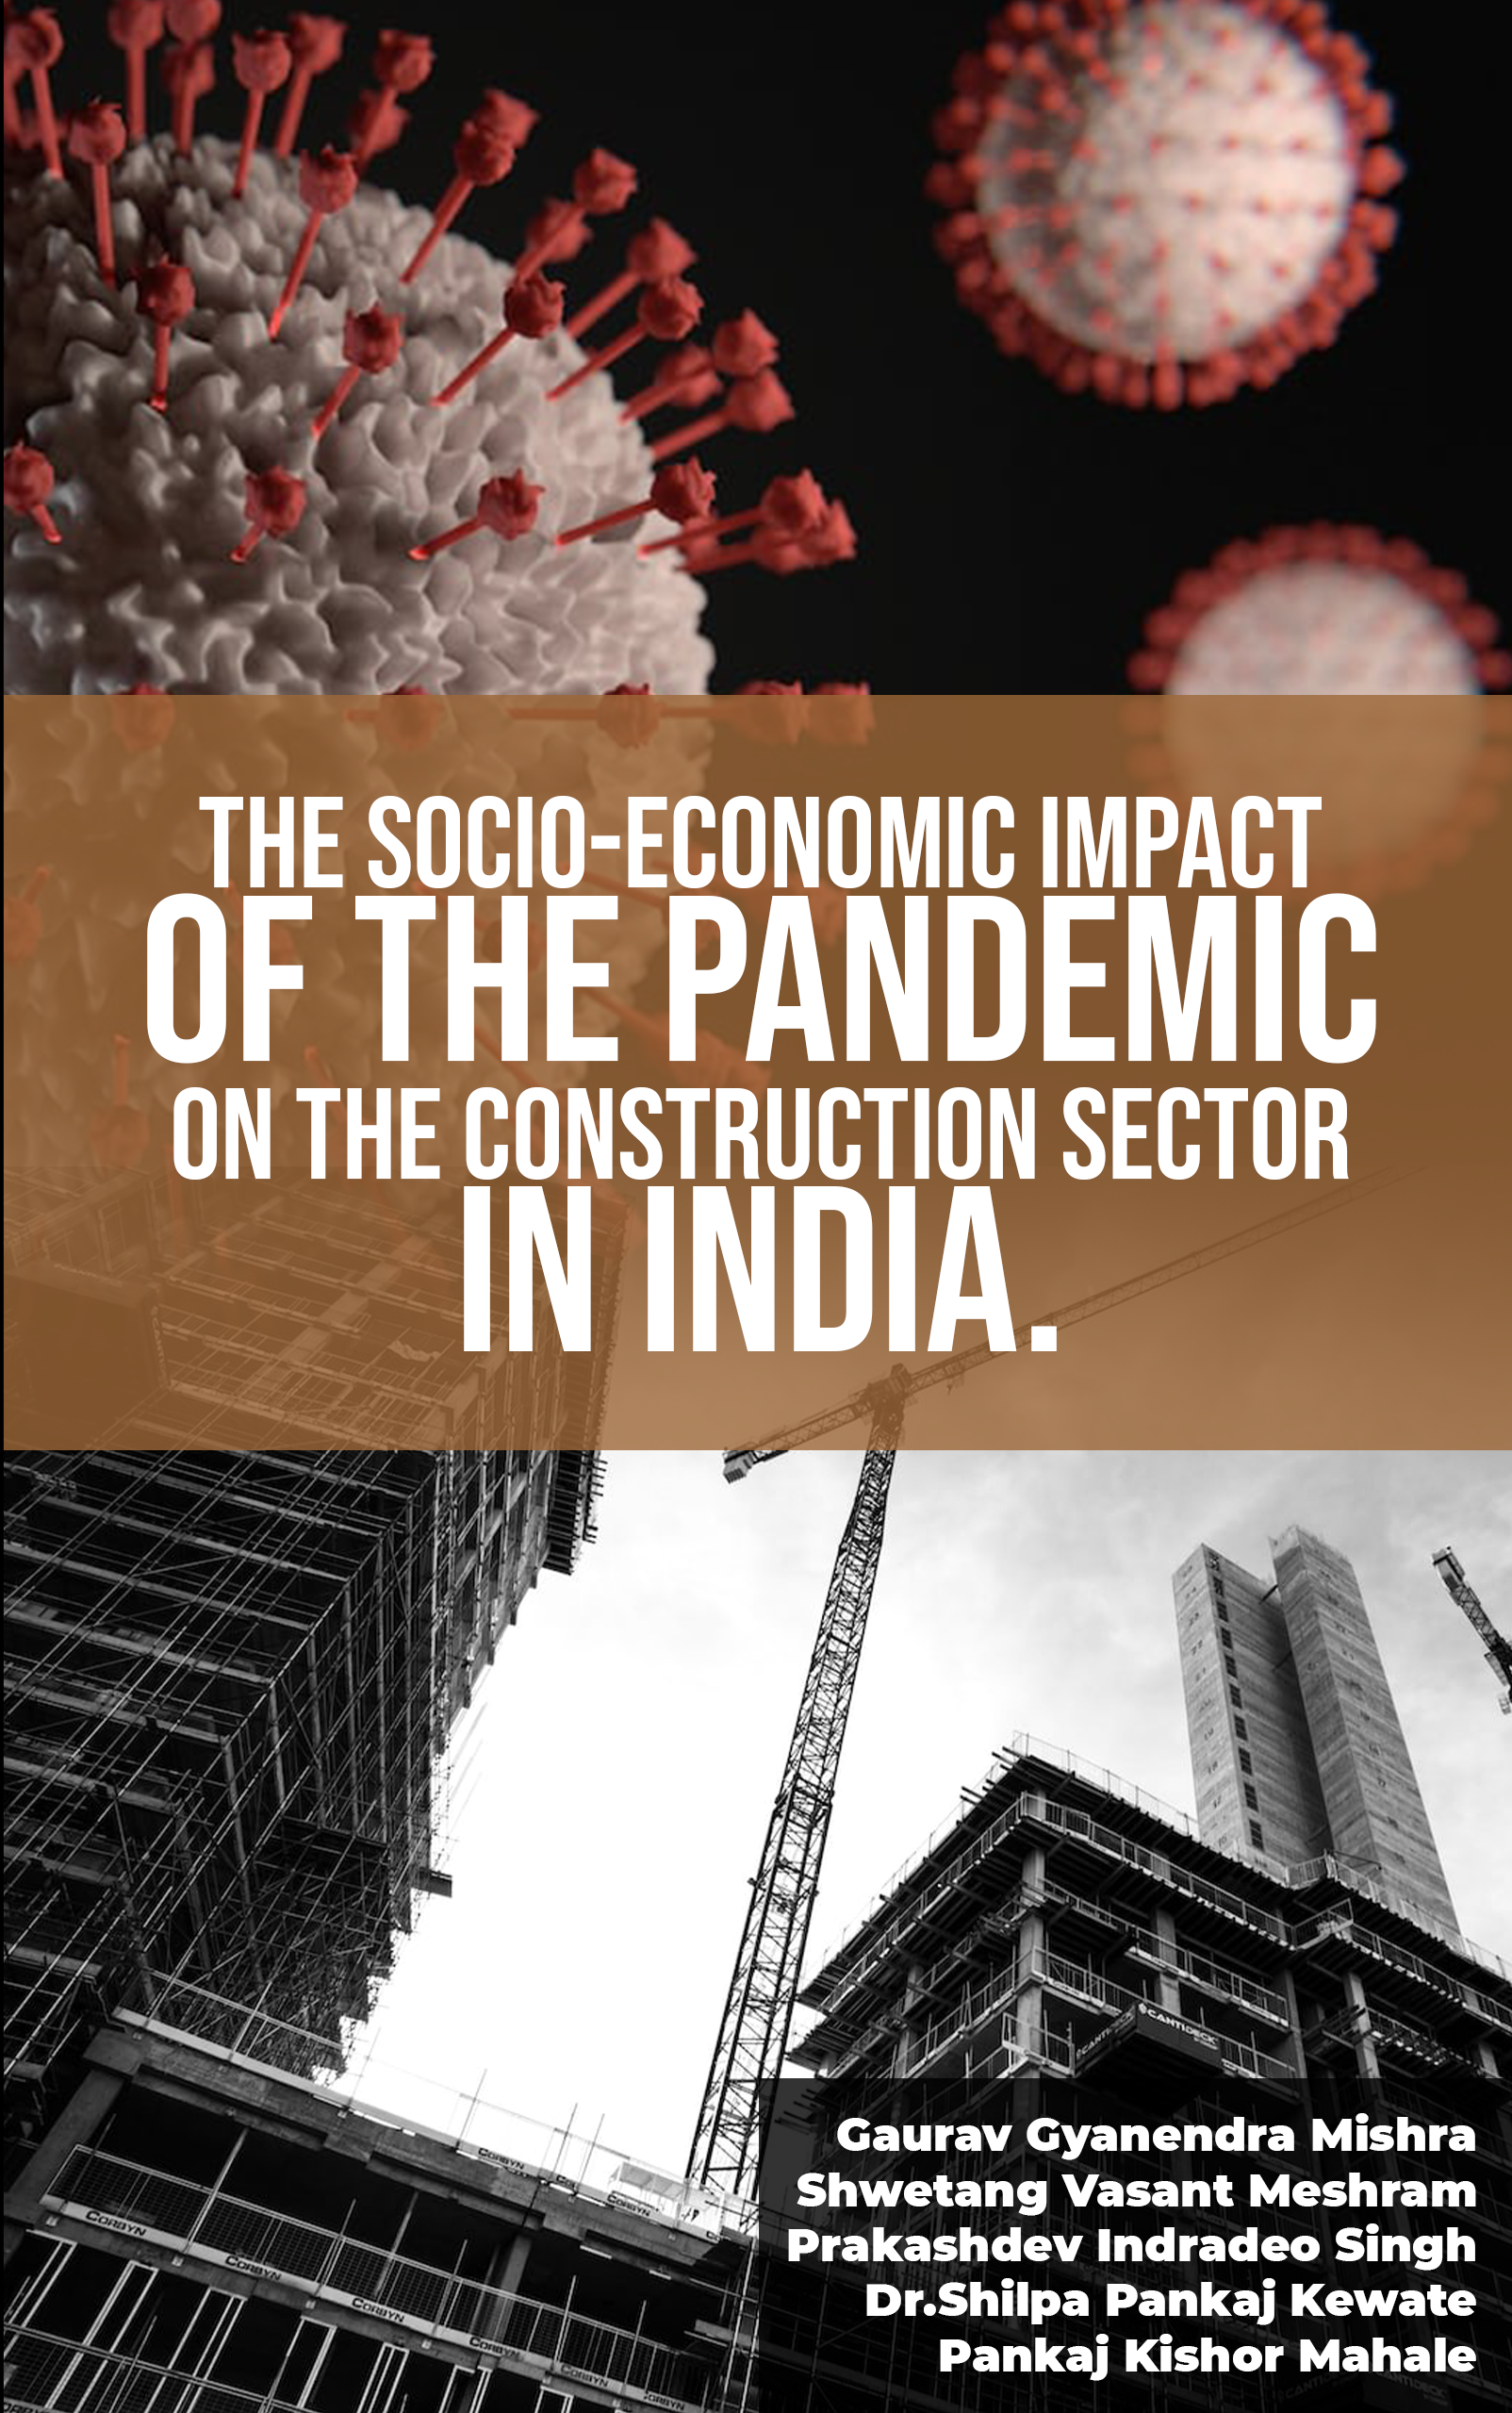 The Socio-Economic Impact of the Pandemic on the Construction Sector in India.